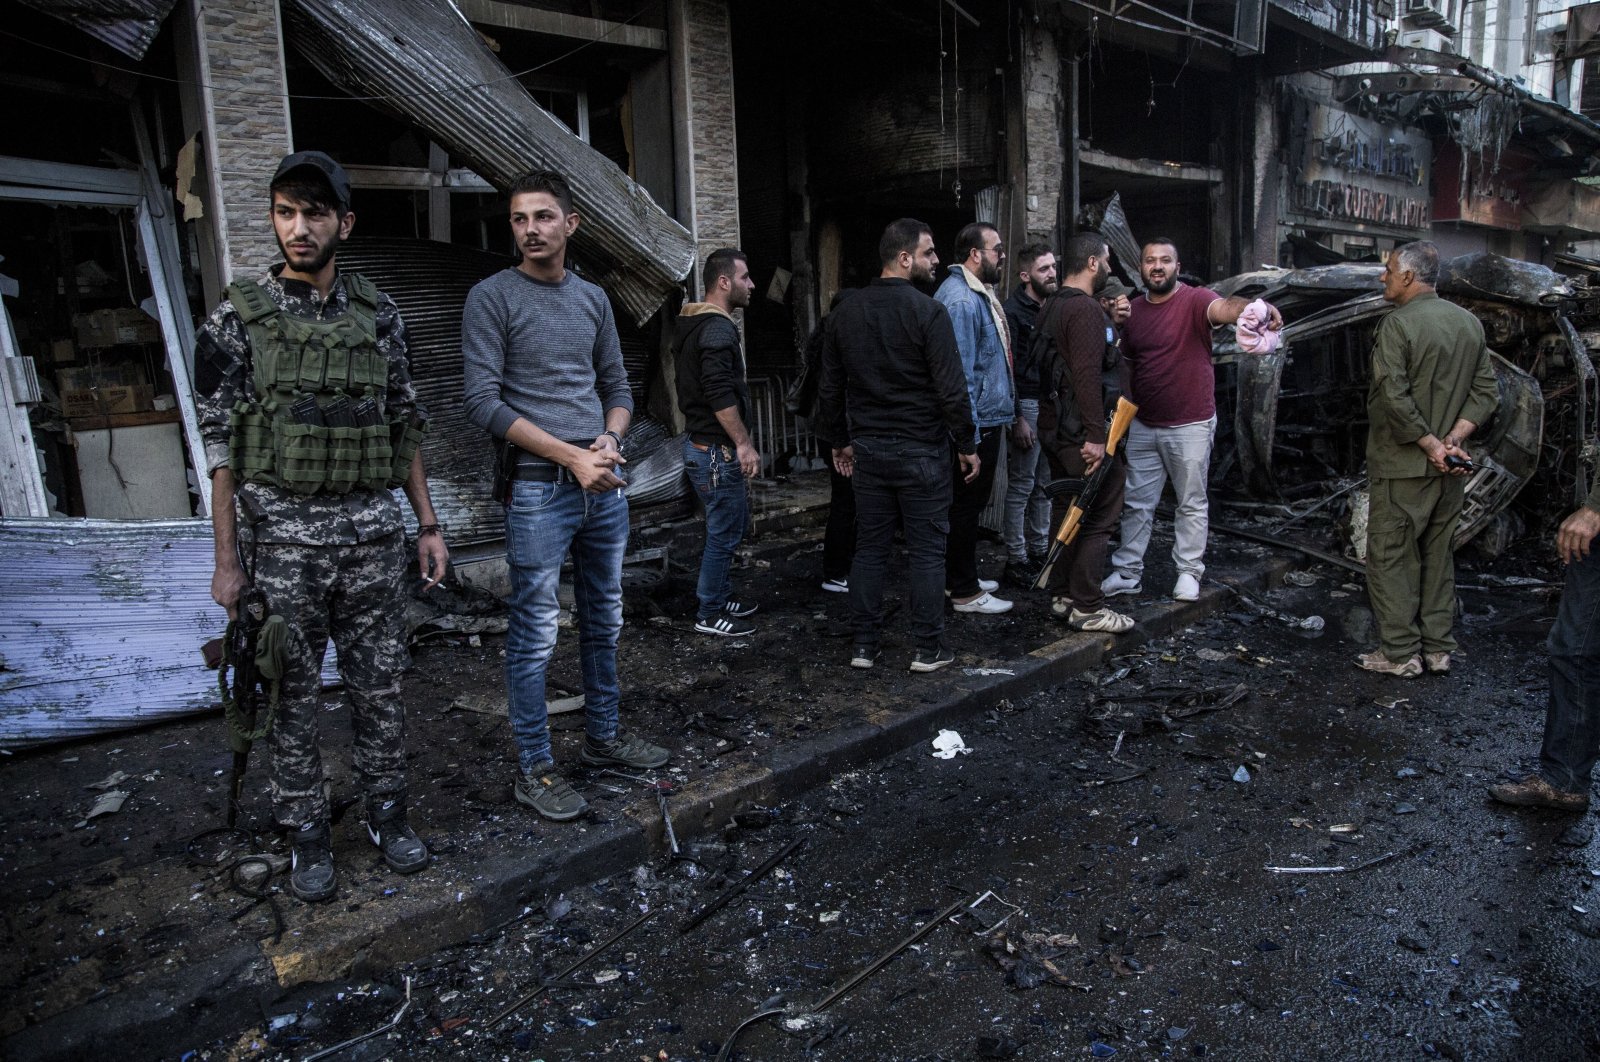 People check the aftermath of a YPG/PKK car bomb blast in the city of Qamishli, northern Syria, Monday, Nov. 11, 2019. (AP File Photo)